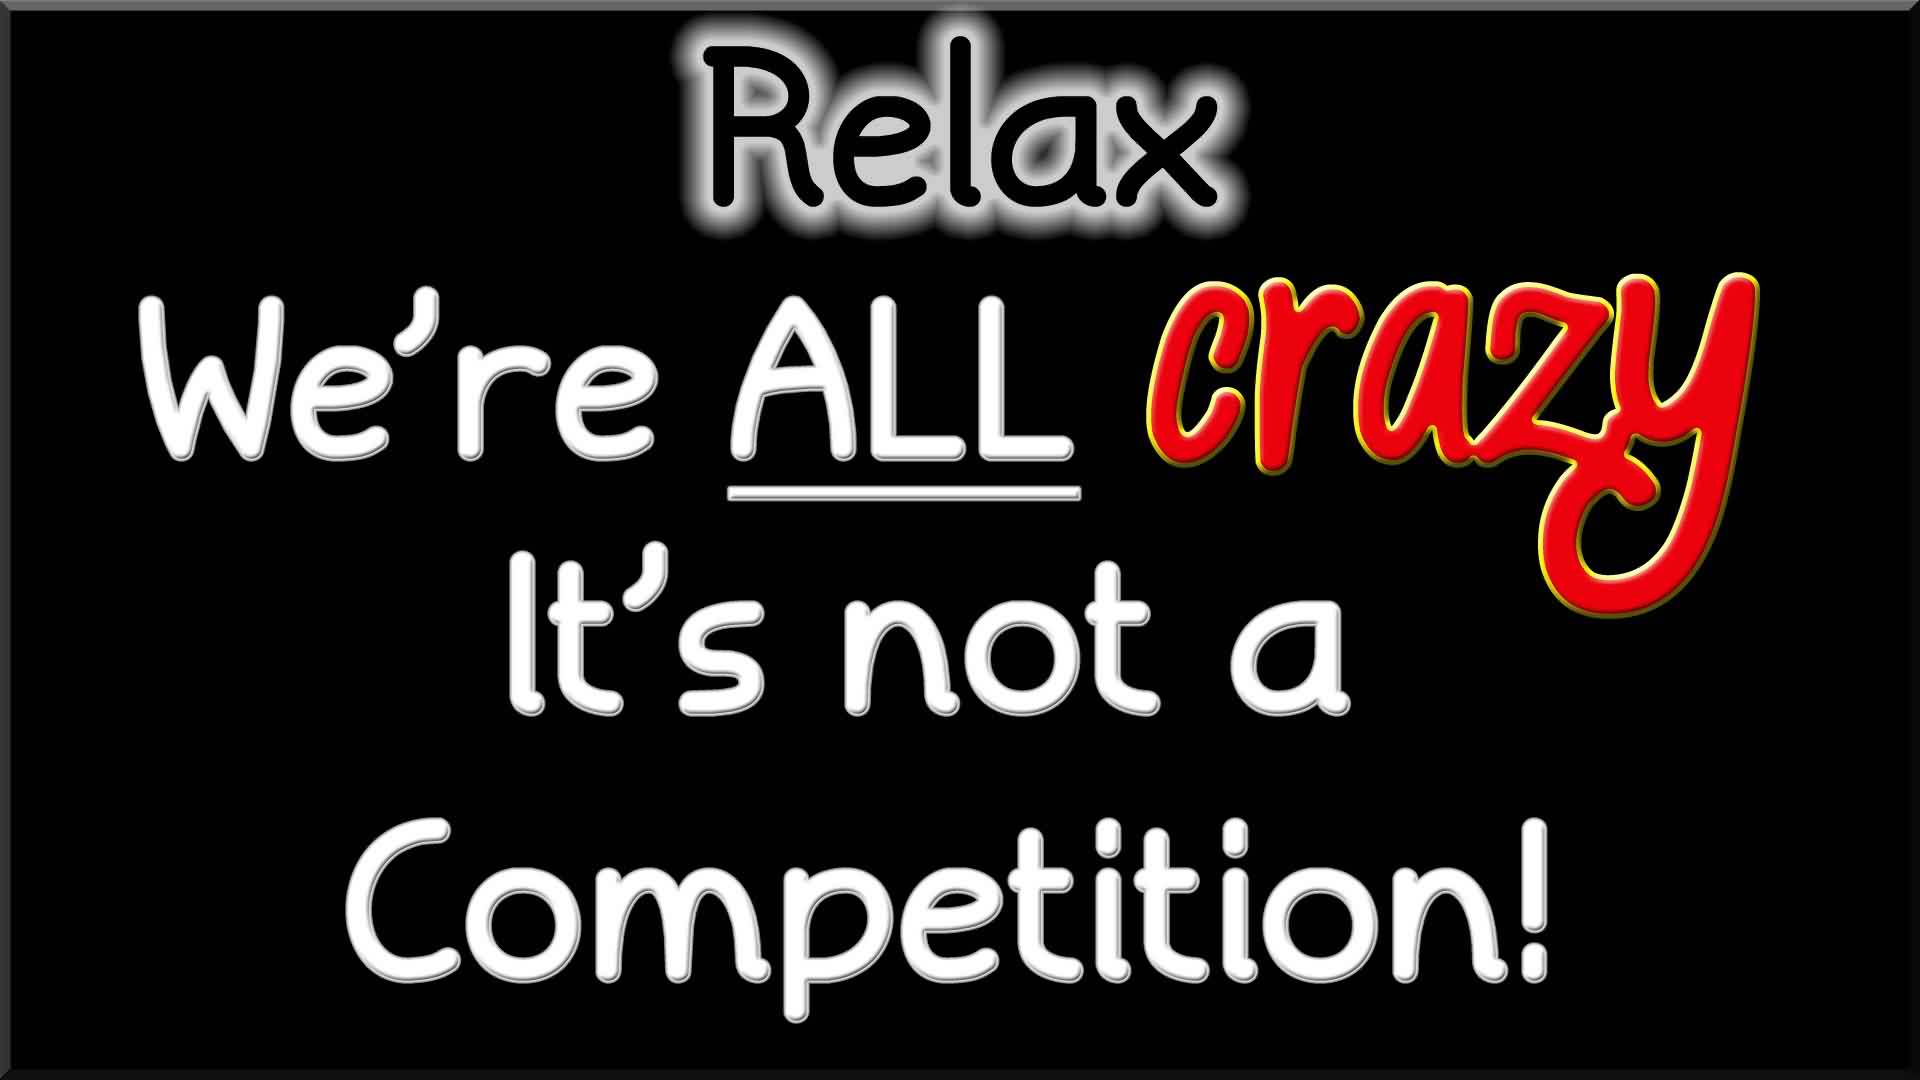 Relax... We're all crazy... It's not a competition